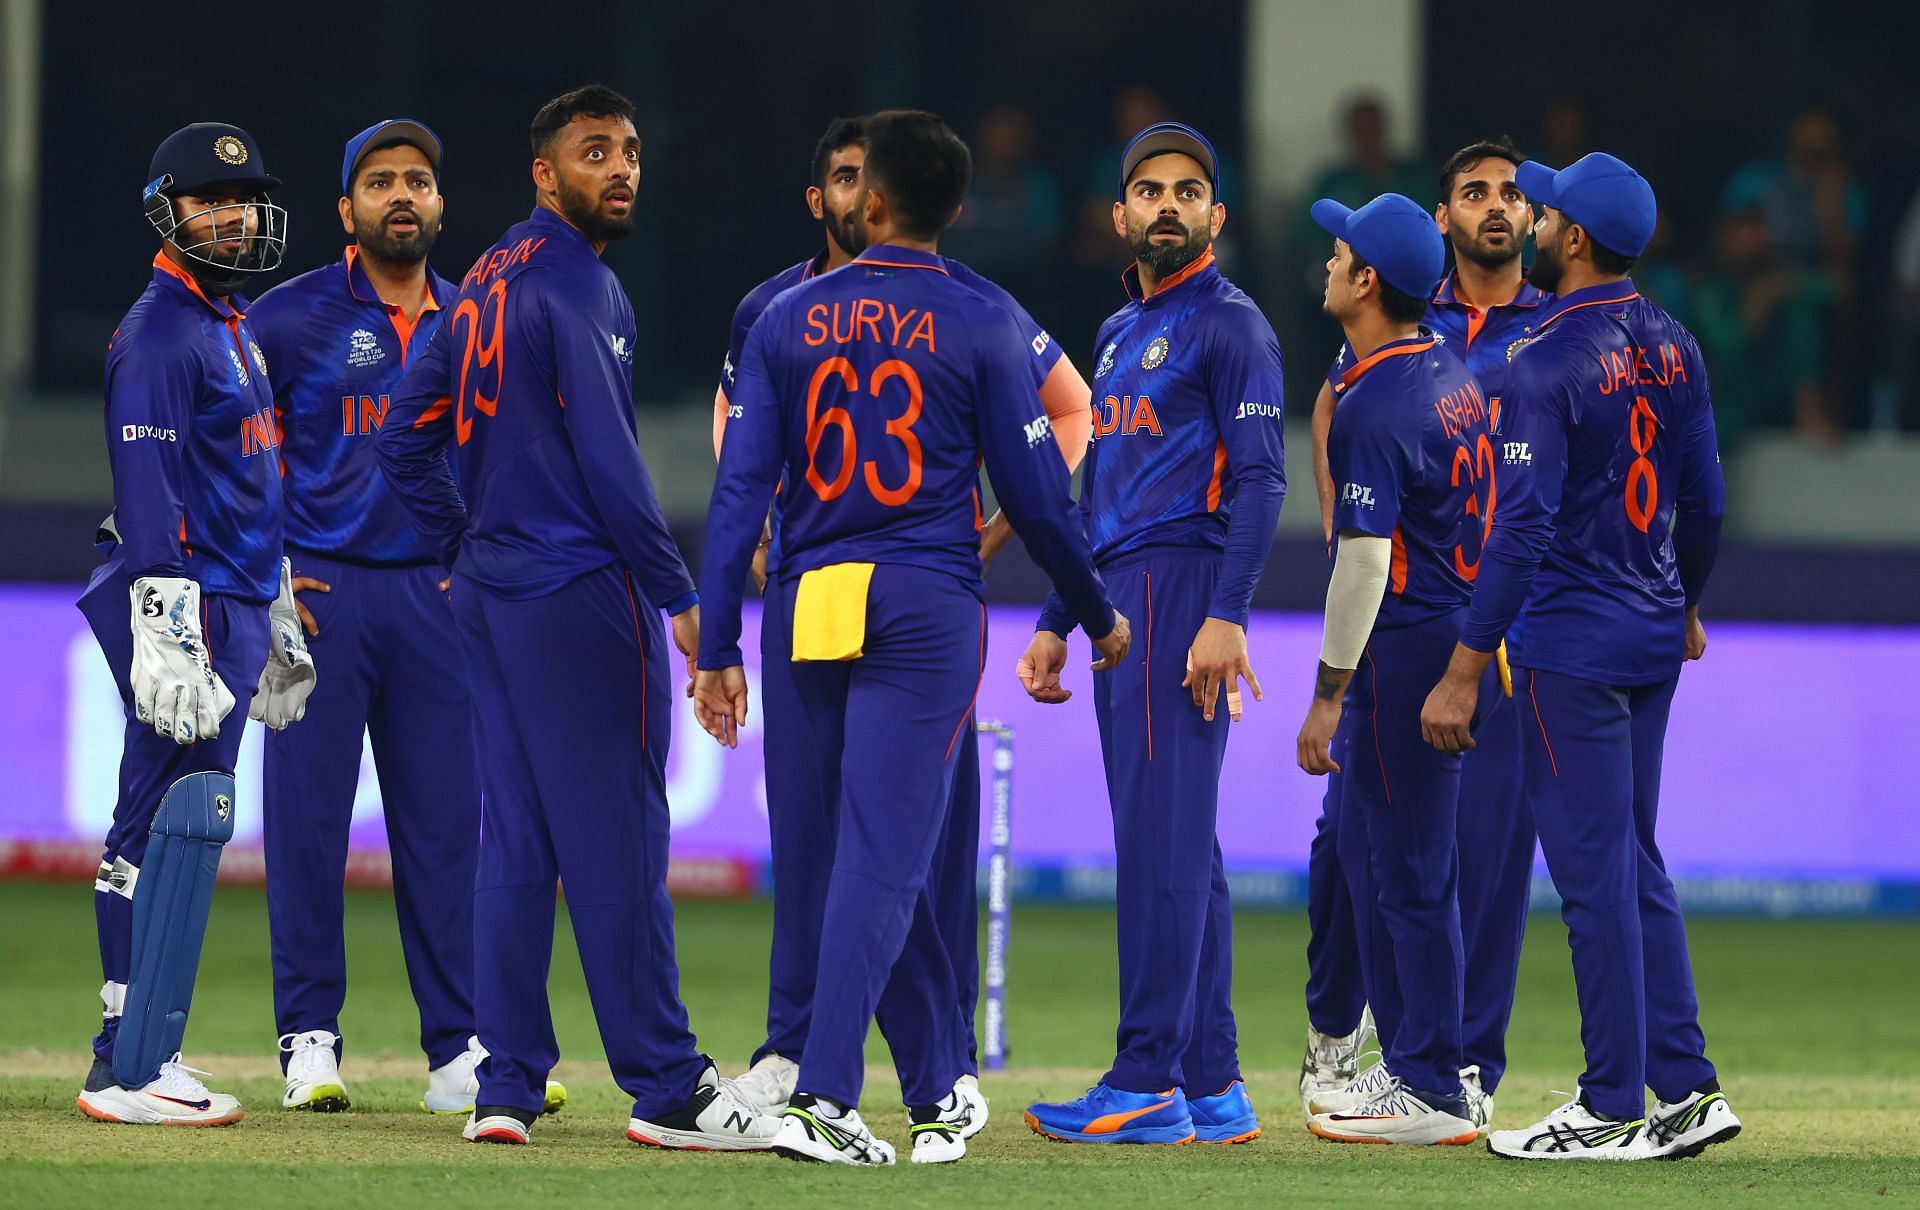 After having lost to Pakistan in their tournament opener, the Virat Kohli led Indian team cannot afford to put a foot wrong when they take on New Zealand in Dubai on Sunday (October 31)